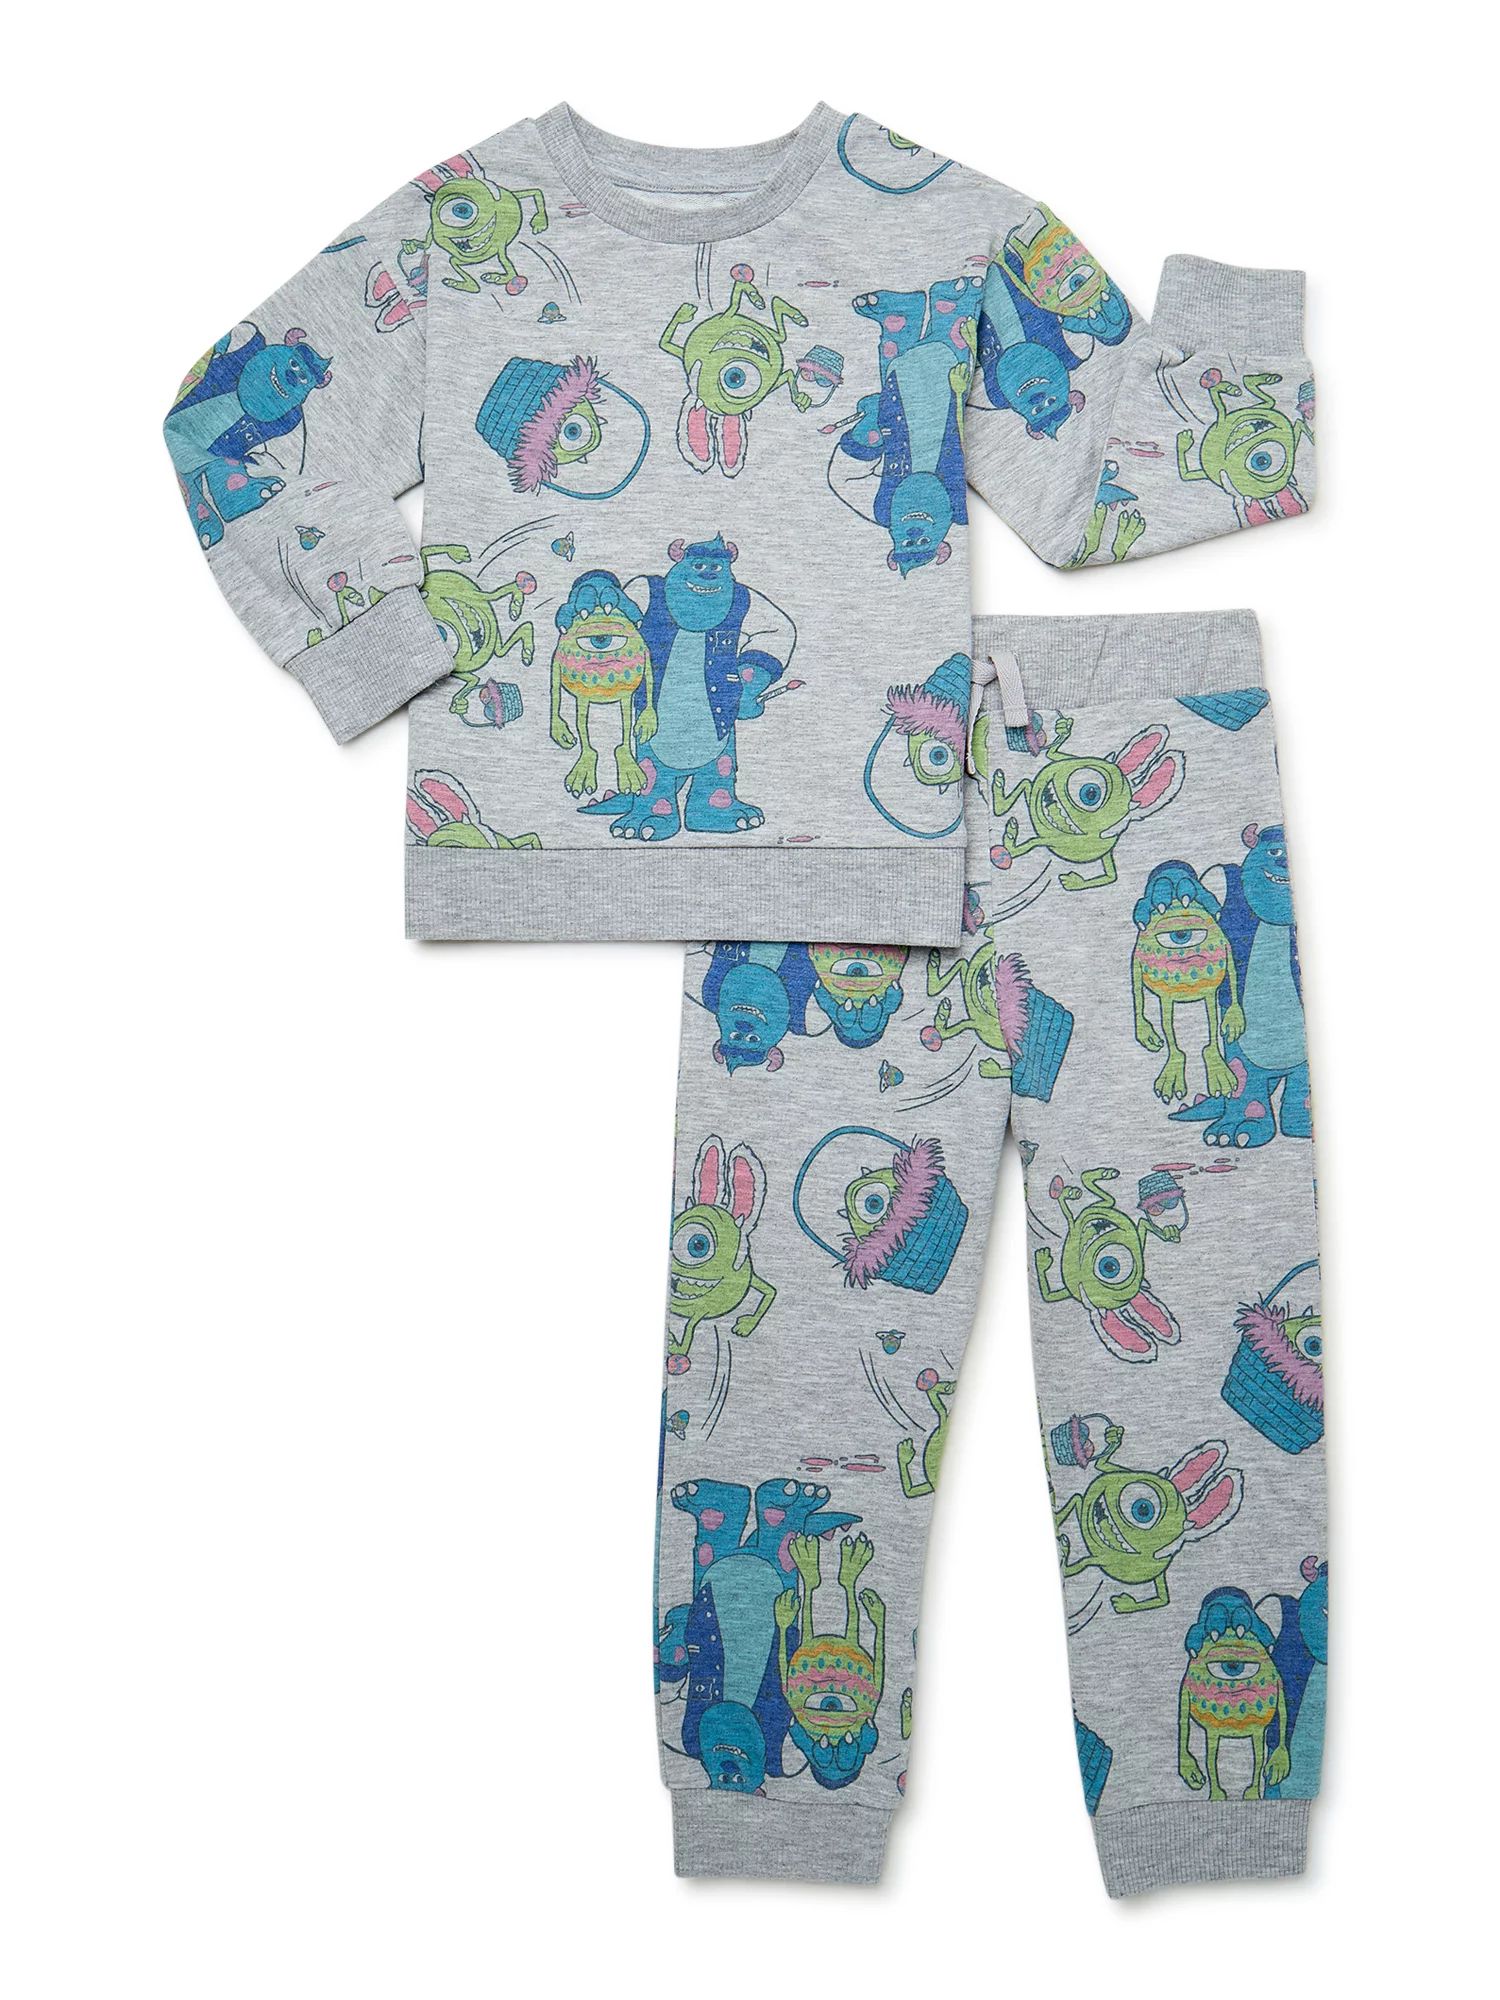 Monsters Inc. Easter Toddler Boy Sweatshirt and Pants Outfit Set, 2-Piece, Sizes 2T-5T | Walmart (US)